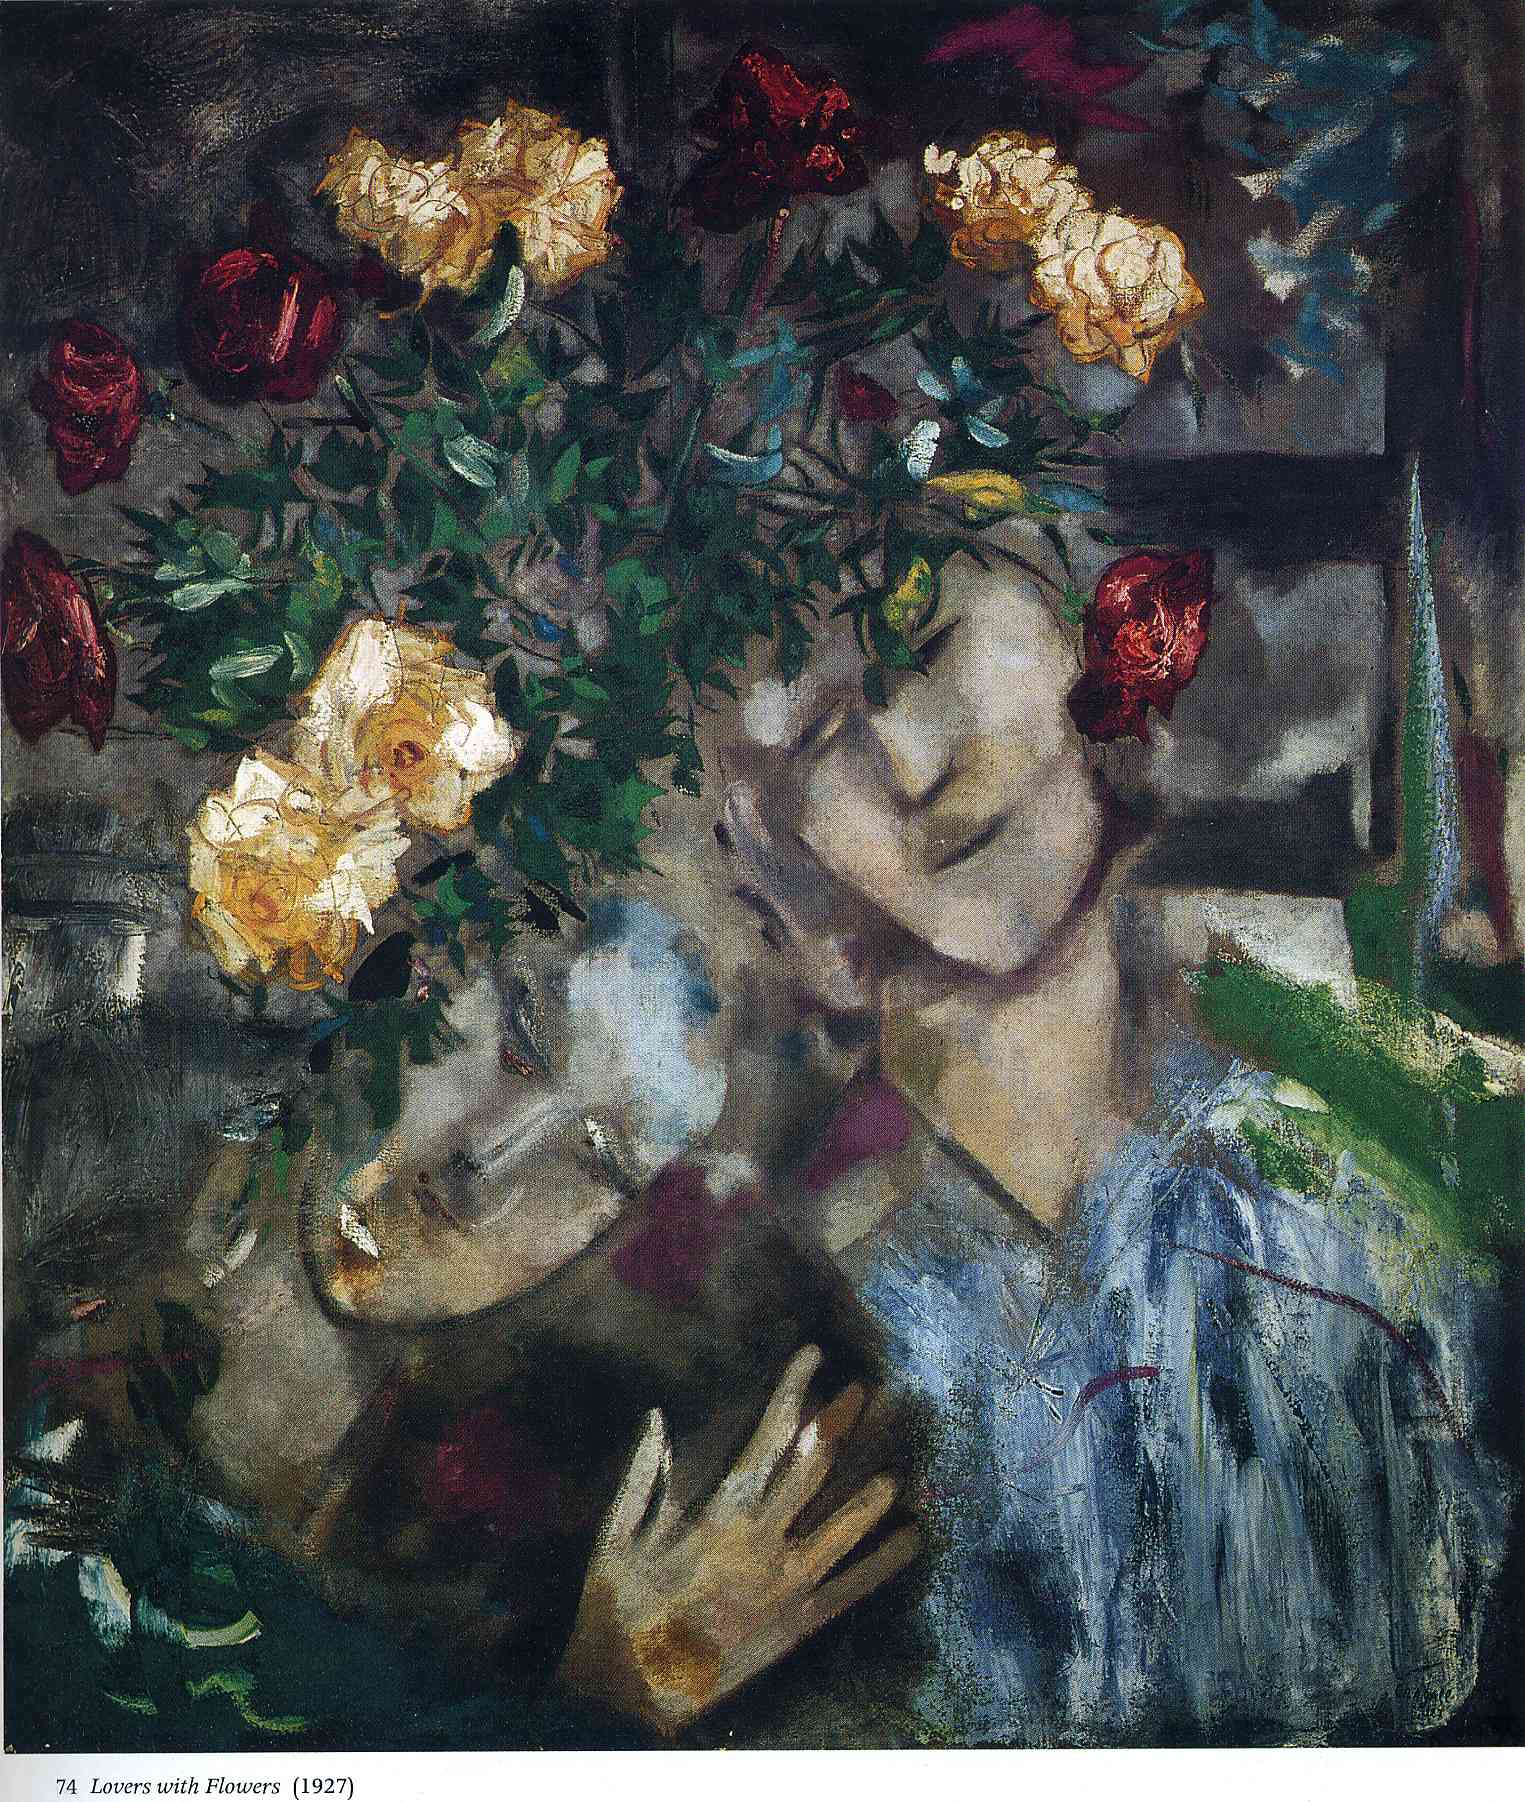 Lovers with Flowers (1927).